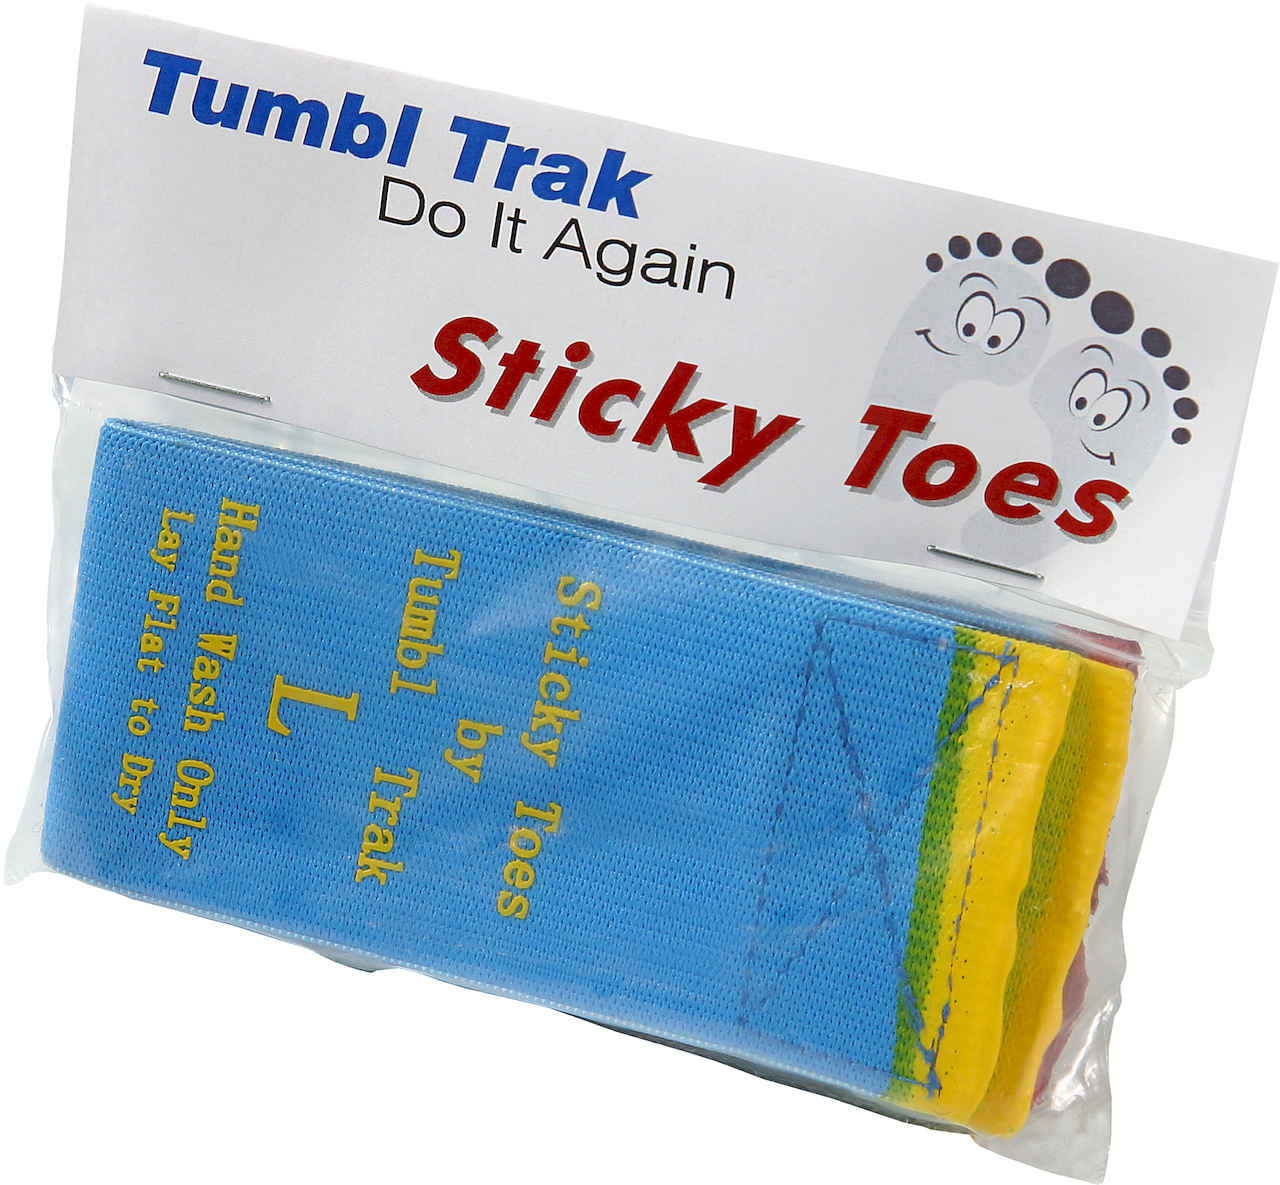 Tumbl Trak: Two Sided Velcro Straps for Gymnastics Cheer Dance